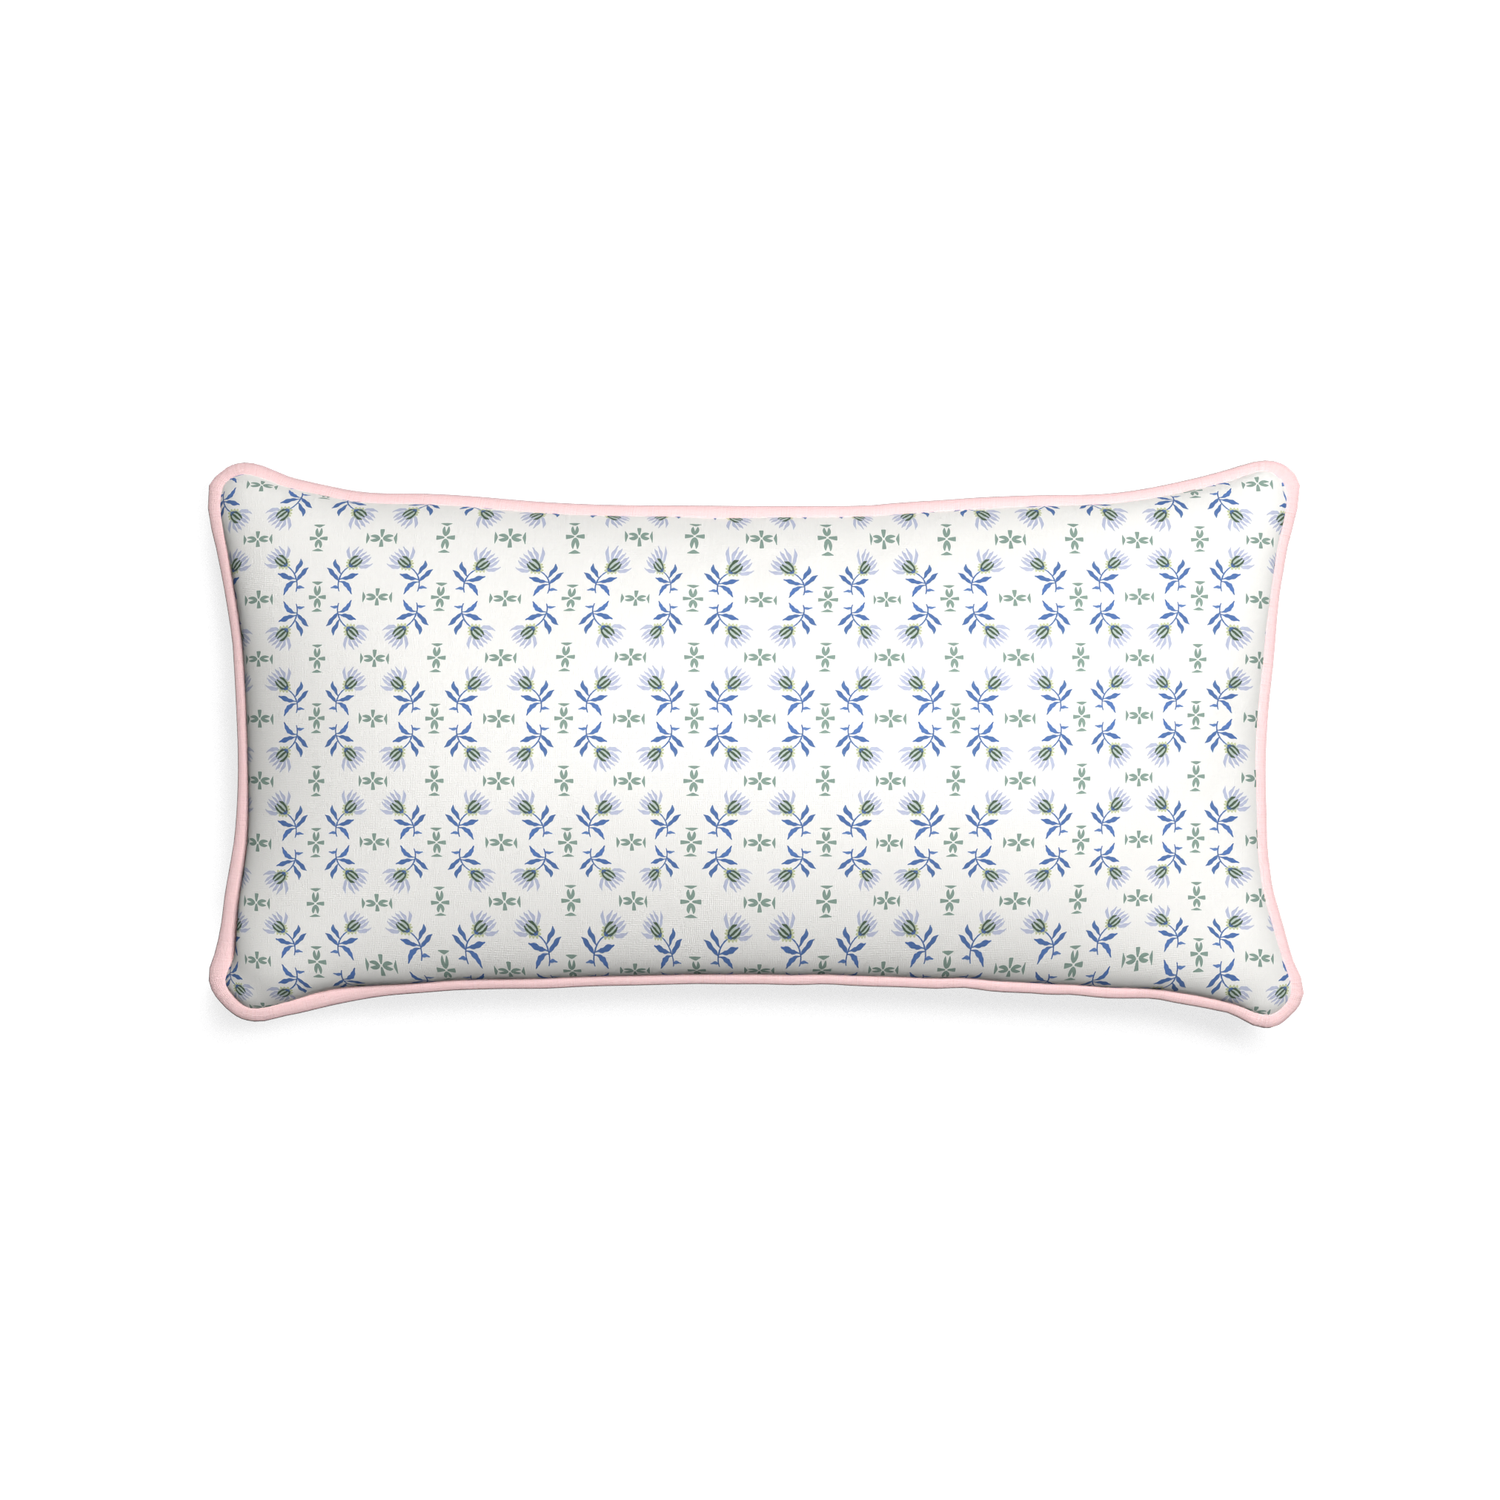 Midi-lumbar lee custom blue & green floralpillow with petal piping on white background